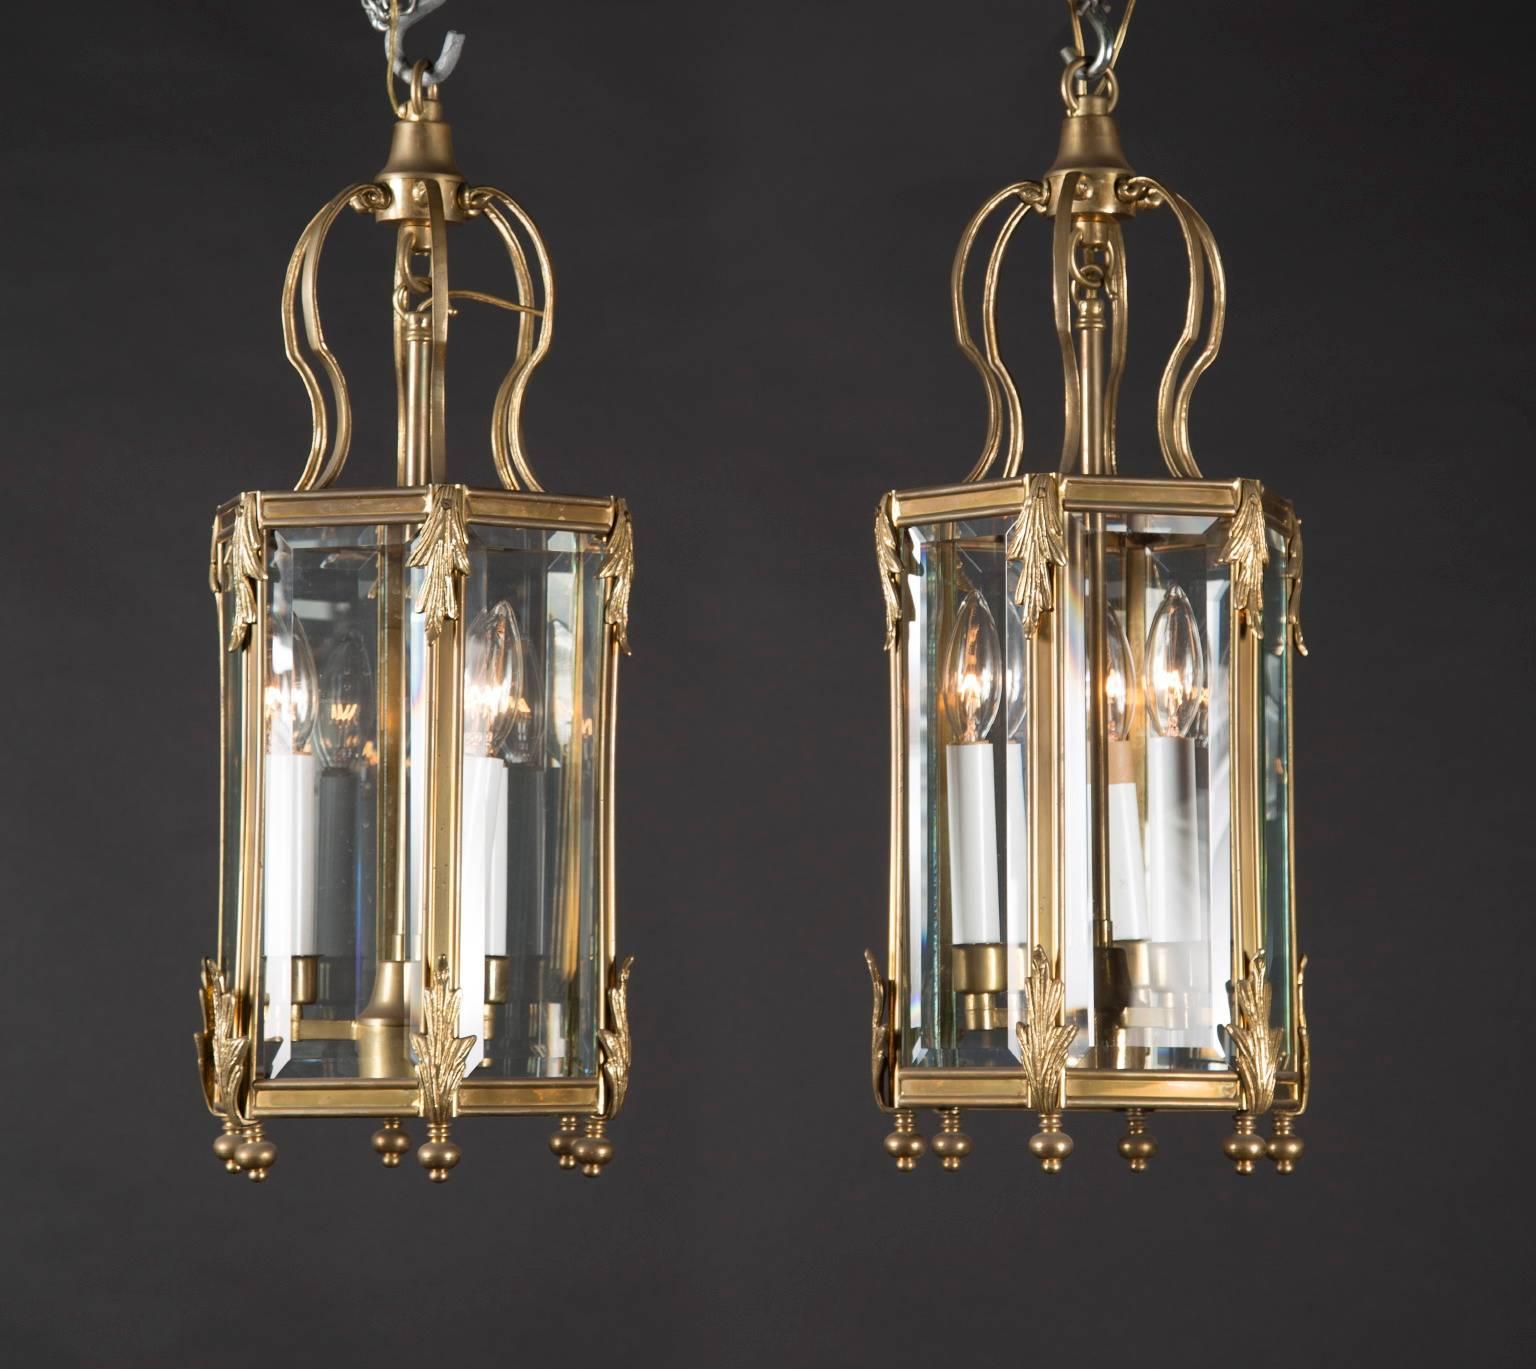 This pair of hanging lanterns is made from bronze with six panes of beveled glass on each fixture. A rounded bronze finial sits at the base of where each pane intersects. Curving arms hold the body of the lantern to a bronze crown, with a central